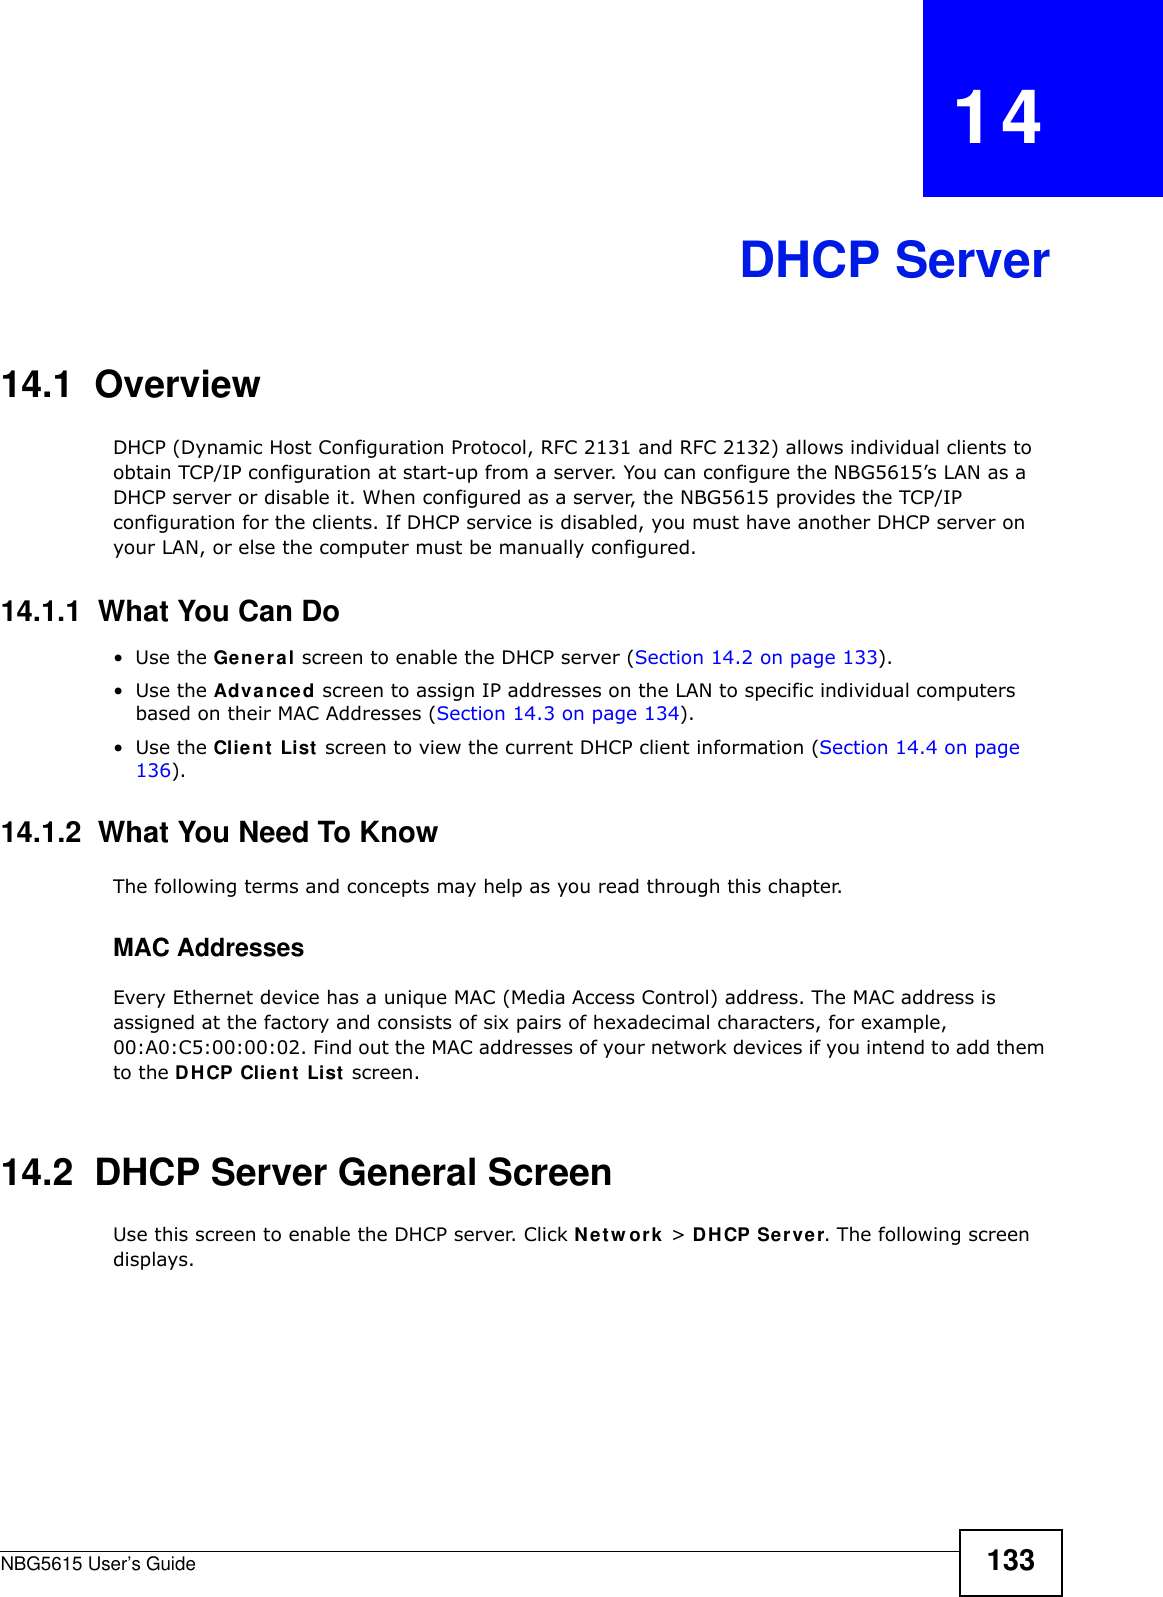 NBG5615 User’s Guide 133CHAPTER   14DHCP Server14.1  OverviewDHCP (Dynamic Host Configuration Protocol, RFC 2131 and RFC 2132) allows individual clients to obtain TCP/IP configuration at start-up from a server. You can configure the NBG5615’s LAN as a DHCP server or disable it. When configured as a server, the NBG5615 provides the TCP/IP configuration for the clients. If DHCP service is disabled, you must have another DHCP server on your LAN, or else the computer must be manually configured.14.1.1  What You Can Do•Use the General screen to enable the DHCP server (Section 14.2 on page 133).•Use the Advanced screen to assign IP addresses on the LAN to specific individual computers based on their MAC Addresses (Section 14.3 on page 134).•Use the Client List screen to view the current DHCP client information (Section 14.4 on page 136). 14.1.2  What You Need To KnowThe following terms and concepts may help as you read through this chapter.MAC AddressesEvery Ethernet device has a unique MAC (Media Access Control) address. The MAC address is assigned at the factory and consists of six pairs of hexadecimal characters, for example, 00:A0:C5:00:00:02. Find out the MAC addresses of your network devices if you intend to add them to the DHCP Client List screen.14.2  DHCP Server General ScreenUse this screen to enable the DHCP server. Click Netw ork &gt; DHCP Server. The following screen displays.